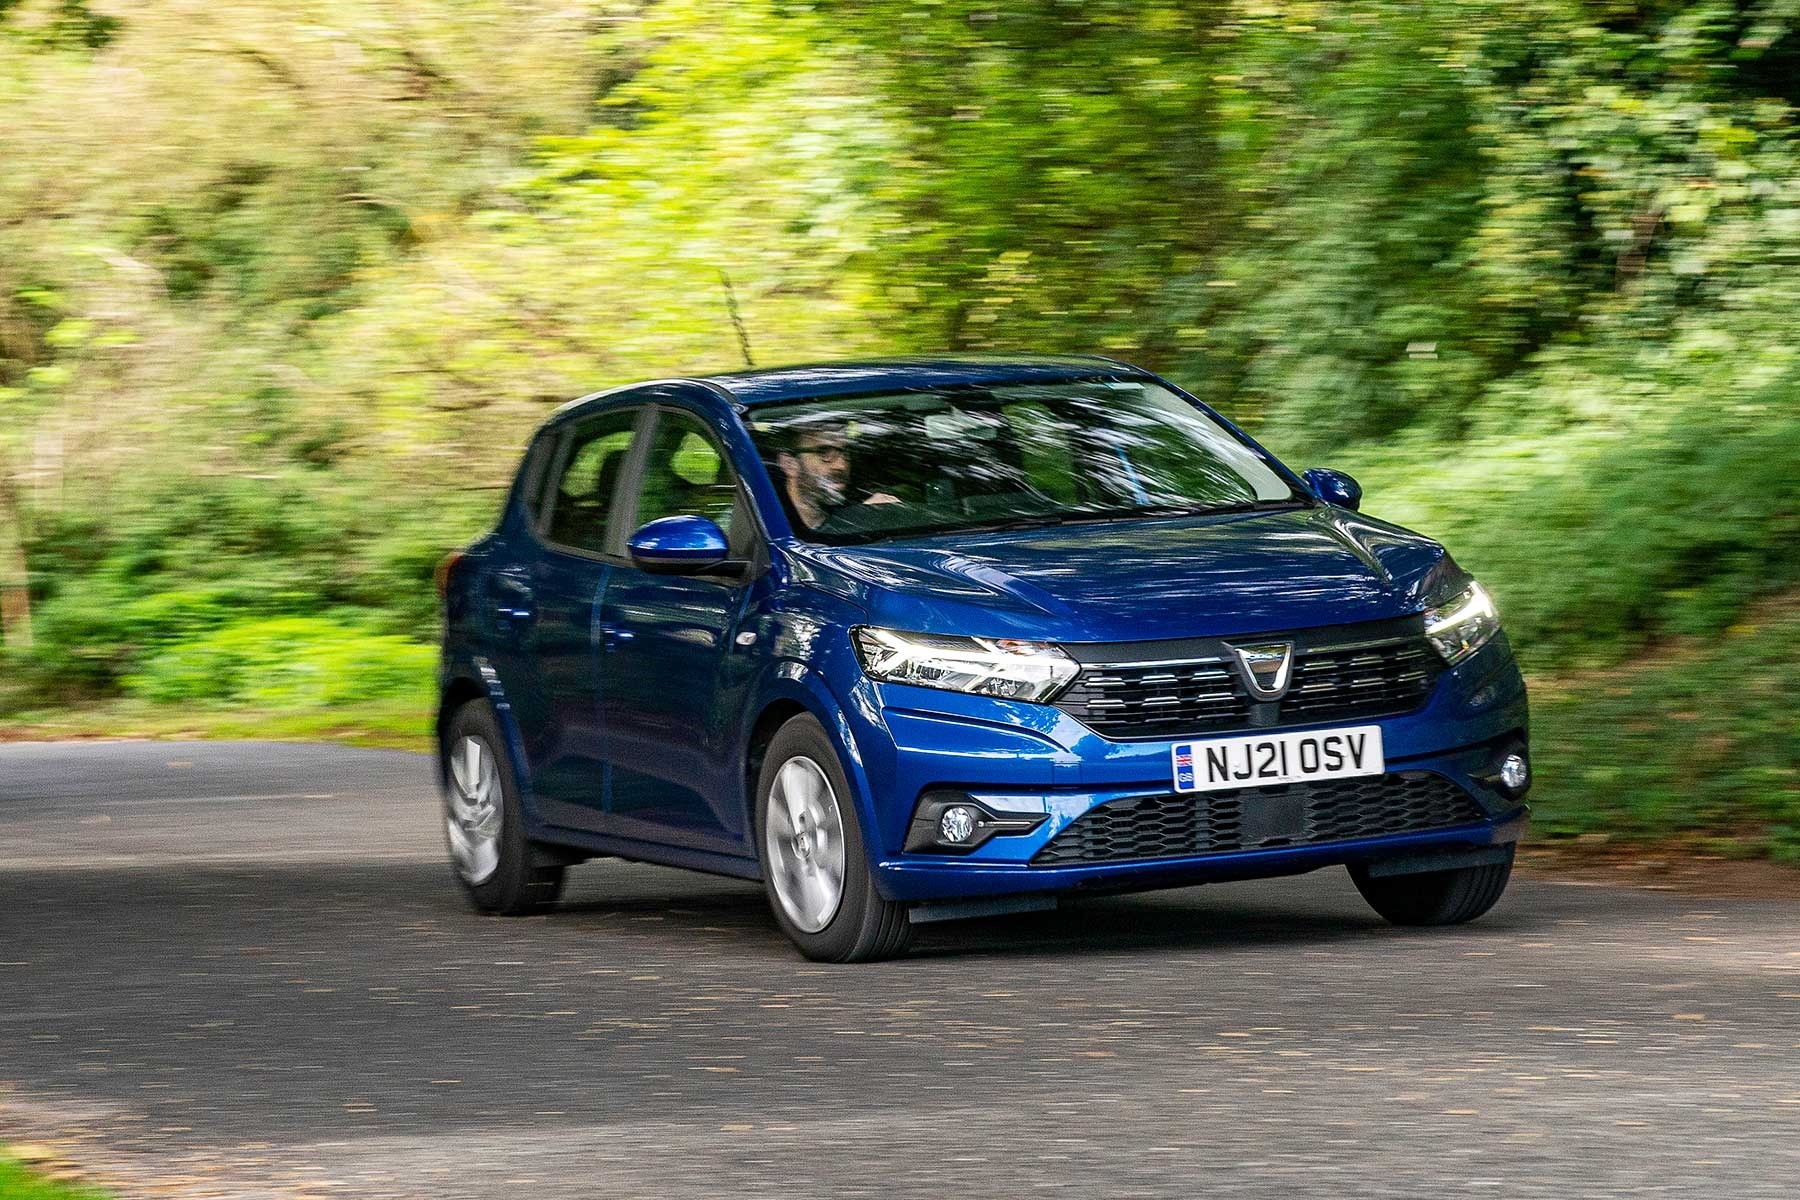 Dacia Sandero Stepway review: there's a lot more to this car than simply  great value